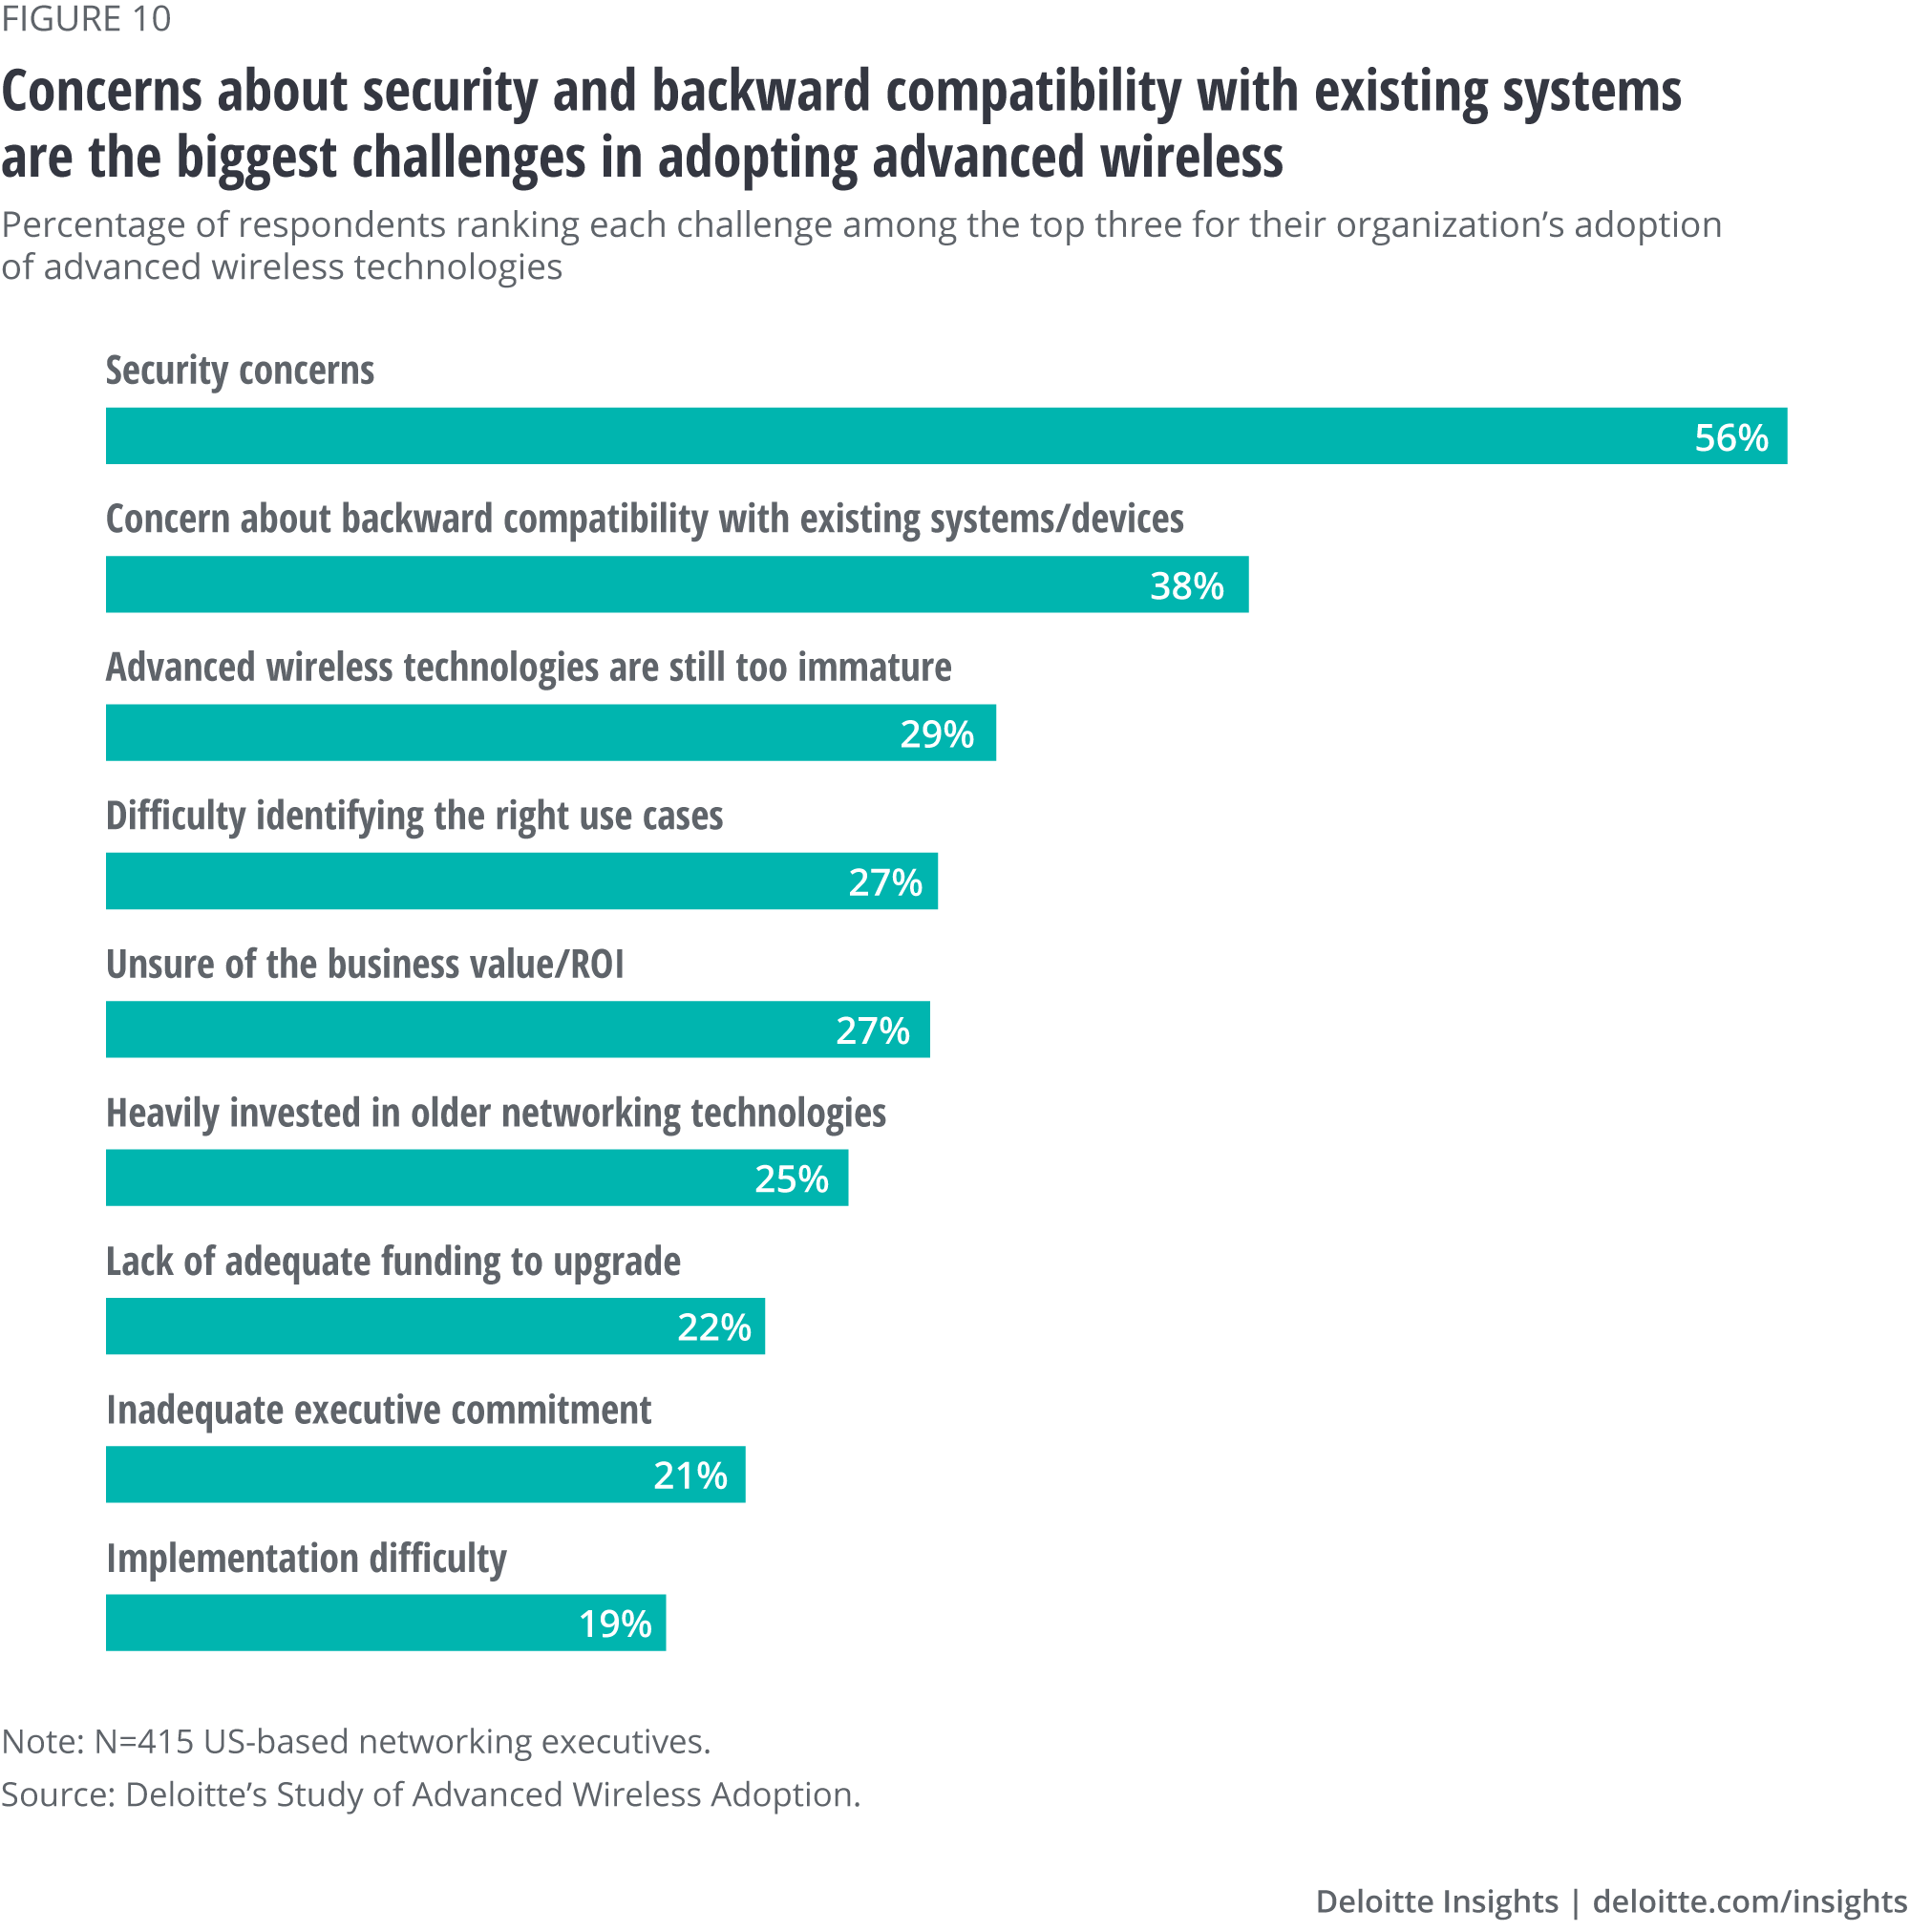 Concerns about security and backward compatibility with existing systems are the biggest challenges in adopting advanced wireless